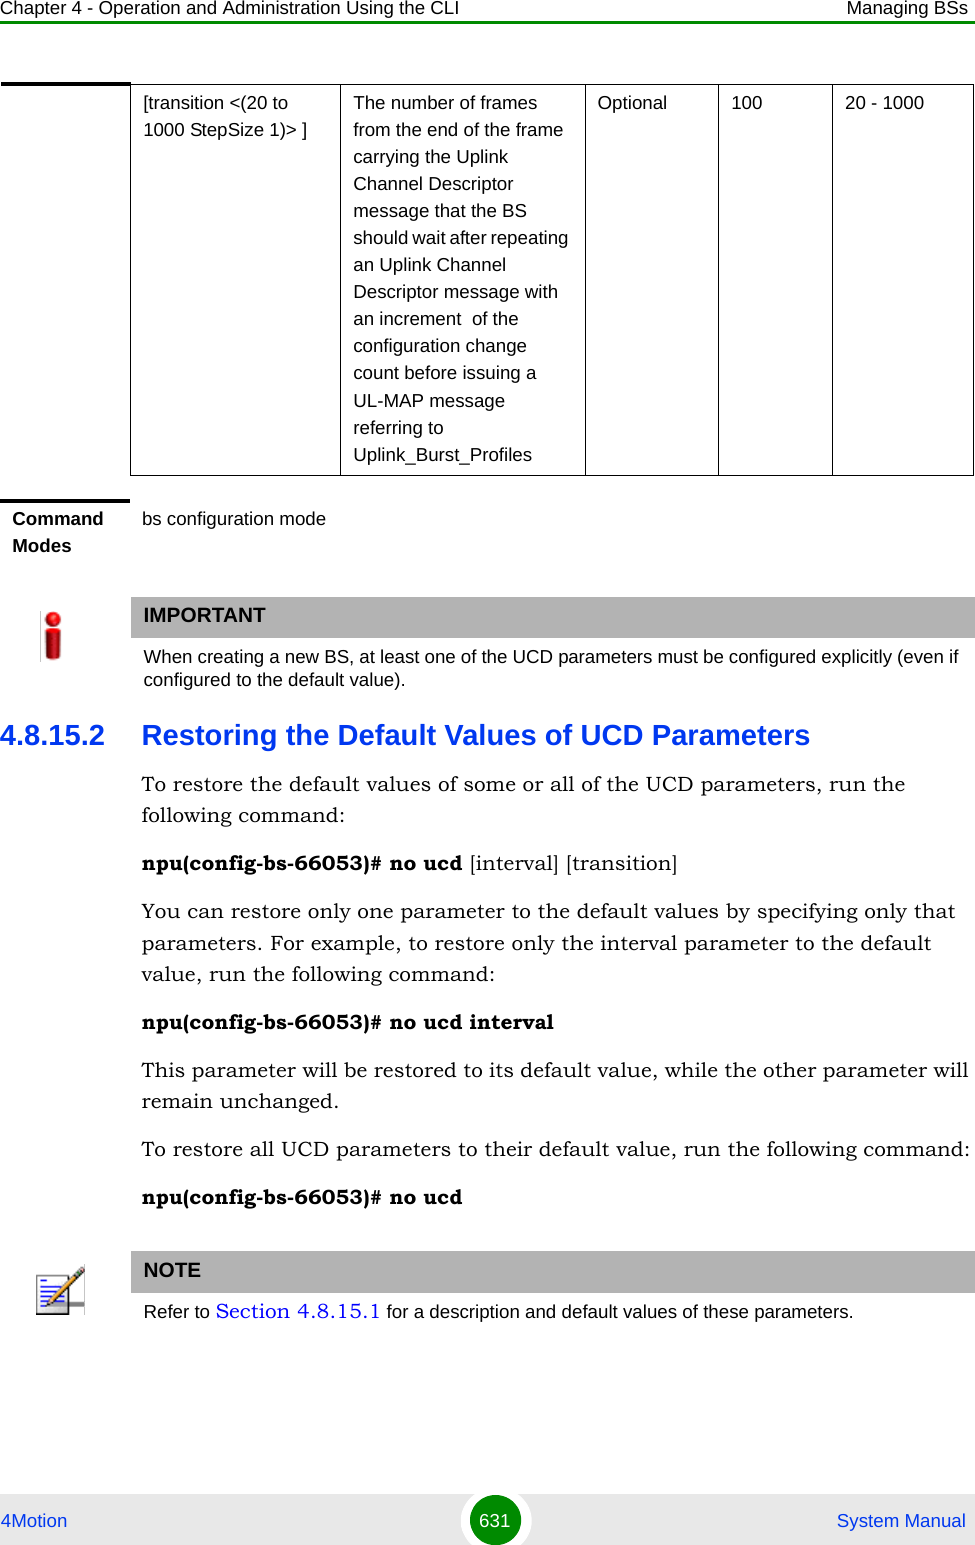 Chapter 4 - Operation and Administration Using the CLI Managing BSs4Motion 631  System Manual4.8.15.2 Restoring the Default Values of UCD ParametersTo restore the default values of some or all of the UCD parameters, run the following command:npu(config-bs-66053)# no ucd [interval] [transition]You can restore only one parameter to the default values by specifying only that parameters. For example, to restore only the interval parameter to the default value, run the following command:npu(config-bs-66053)# no ucd intervalThis parameter will be restored to its default value, while the other parameter will remain unchanged.To restore all UCD parameters to their default value, run the following command:npu(config-bs-66053)# no ucd[transition &lt;(20 to 1000 StepSize 1)&gt; ]The number of frames from the end of the frame carrying the Uplink Channel Descriptor message that the BS should wait after repeating an Uplink Channel Descriptor message with an increment  of the configuration change count before issuing a UL-MAP message referring to Uplink_Burst_ProfilesOptional 100 20 - 1000Command Modesbs configuration modeIMPORTANTWhen creating a new BS, at least one of the UCD parameters must be configured explicitly (even if configured to the default value).NOTERefer to Section 4.8.15.1 for a description and default values of these parameters.